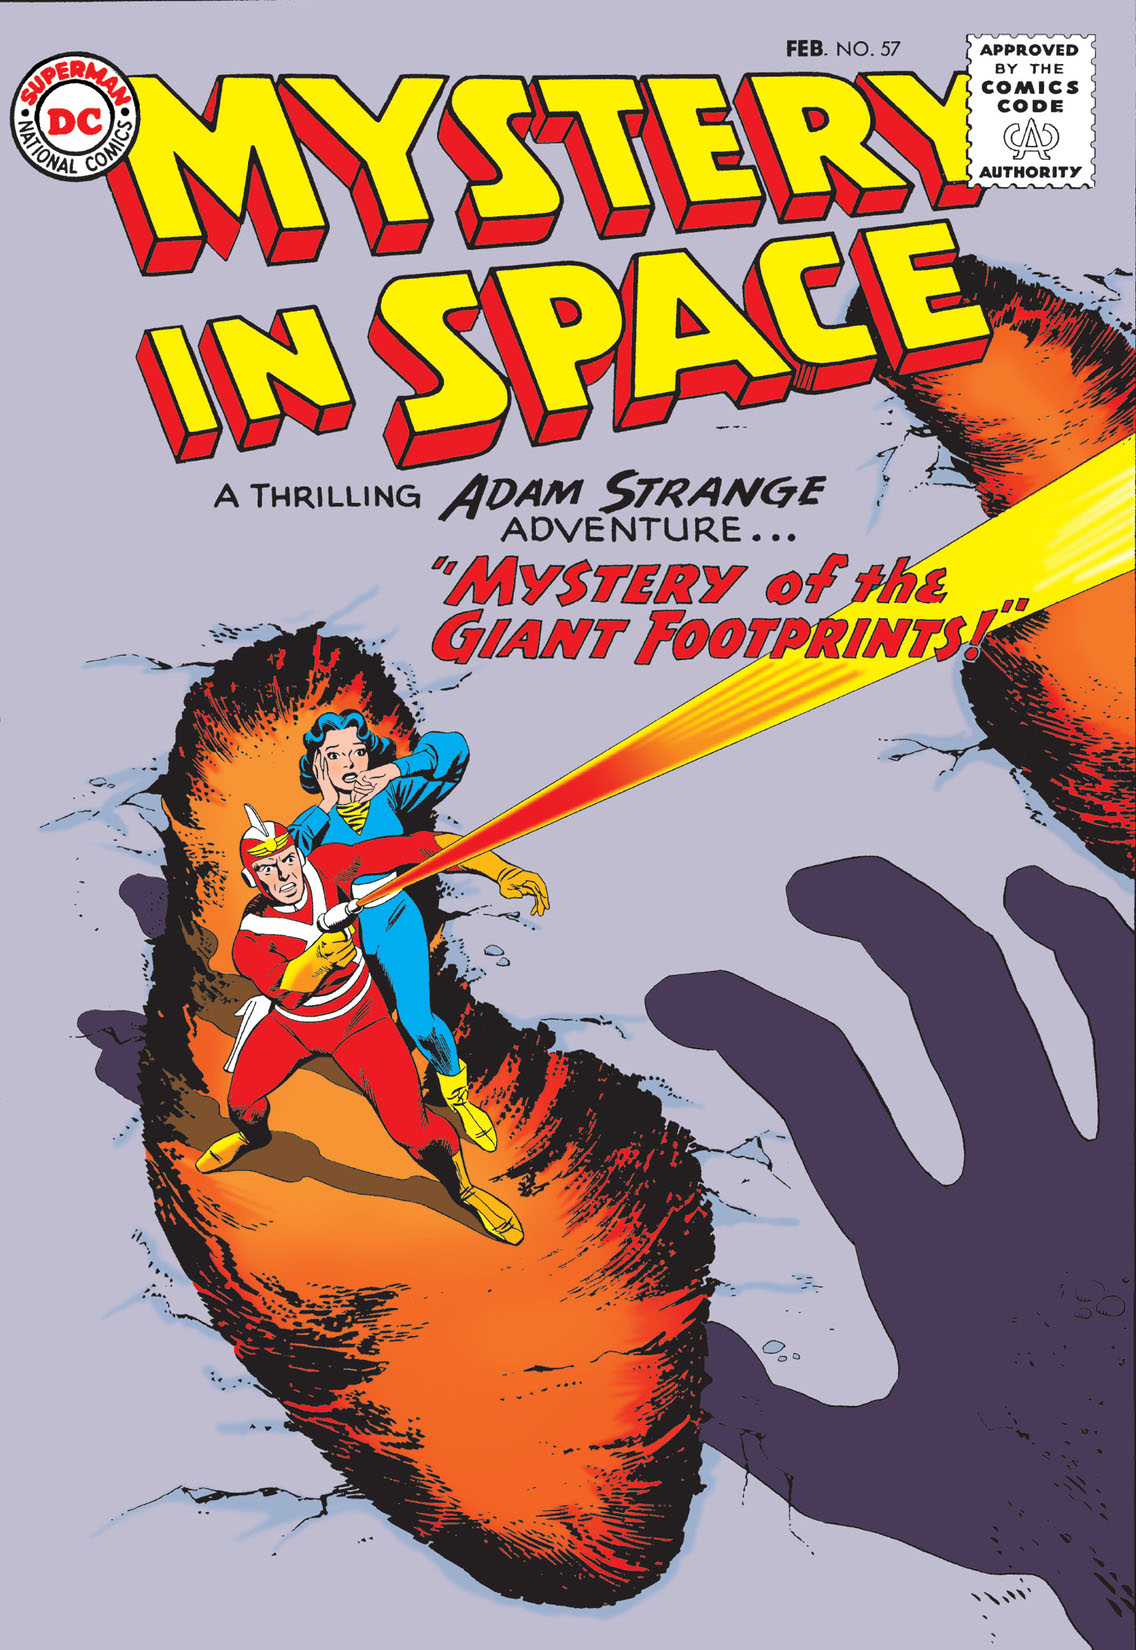 Mystery in Space (1951-1981) #57 preview images